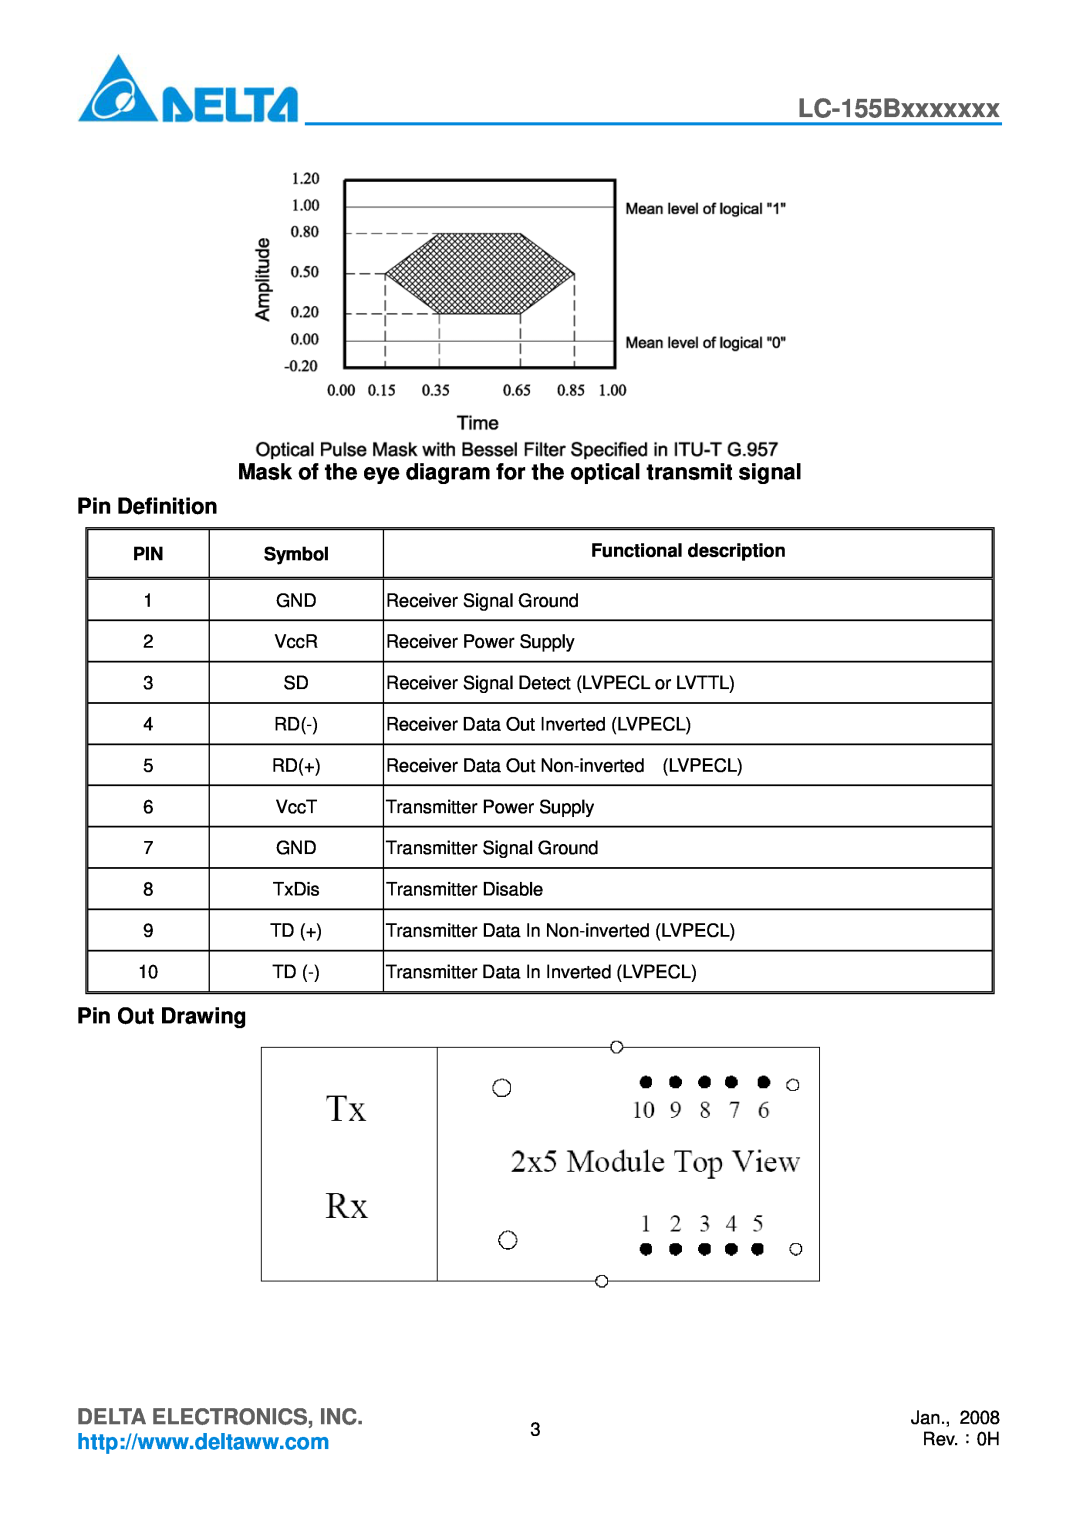 Delta Electronics LC-155Bxxxxxxx Mask of the eye diagram for the optical transmit signal, Pin Definition, Pin Out Drawing 